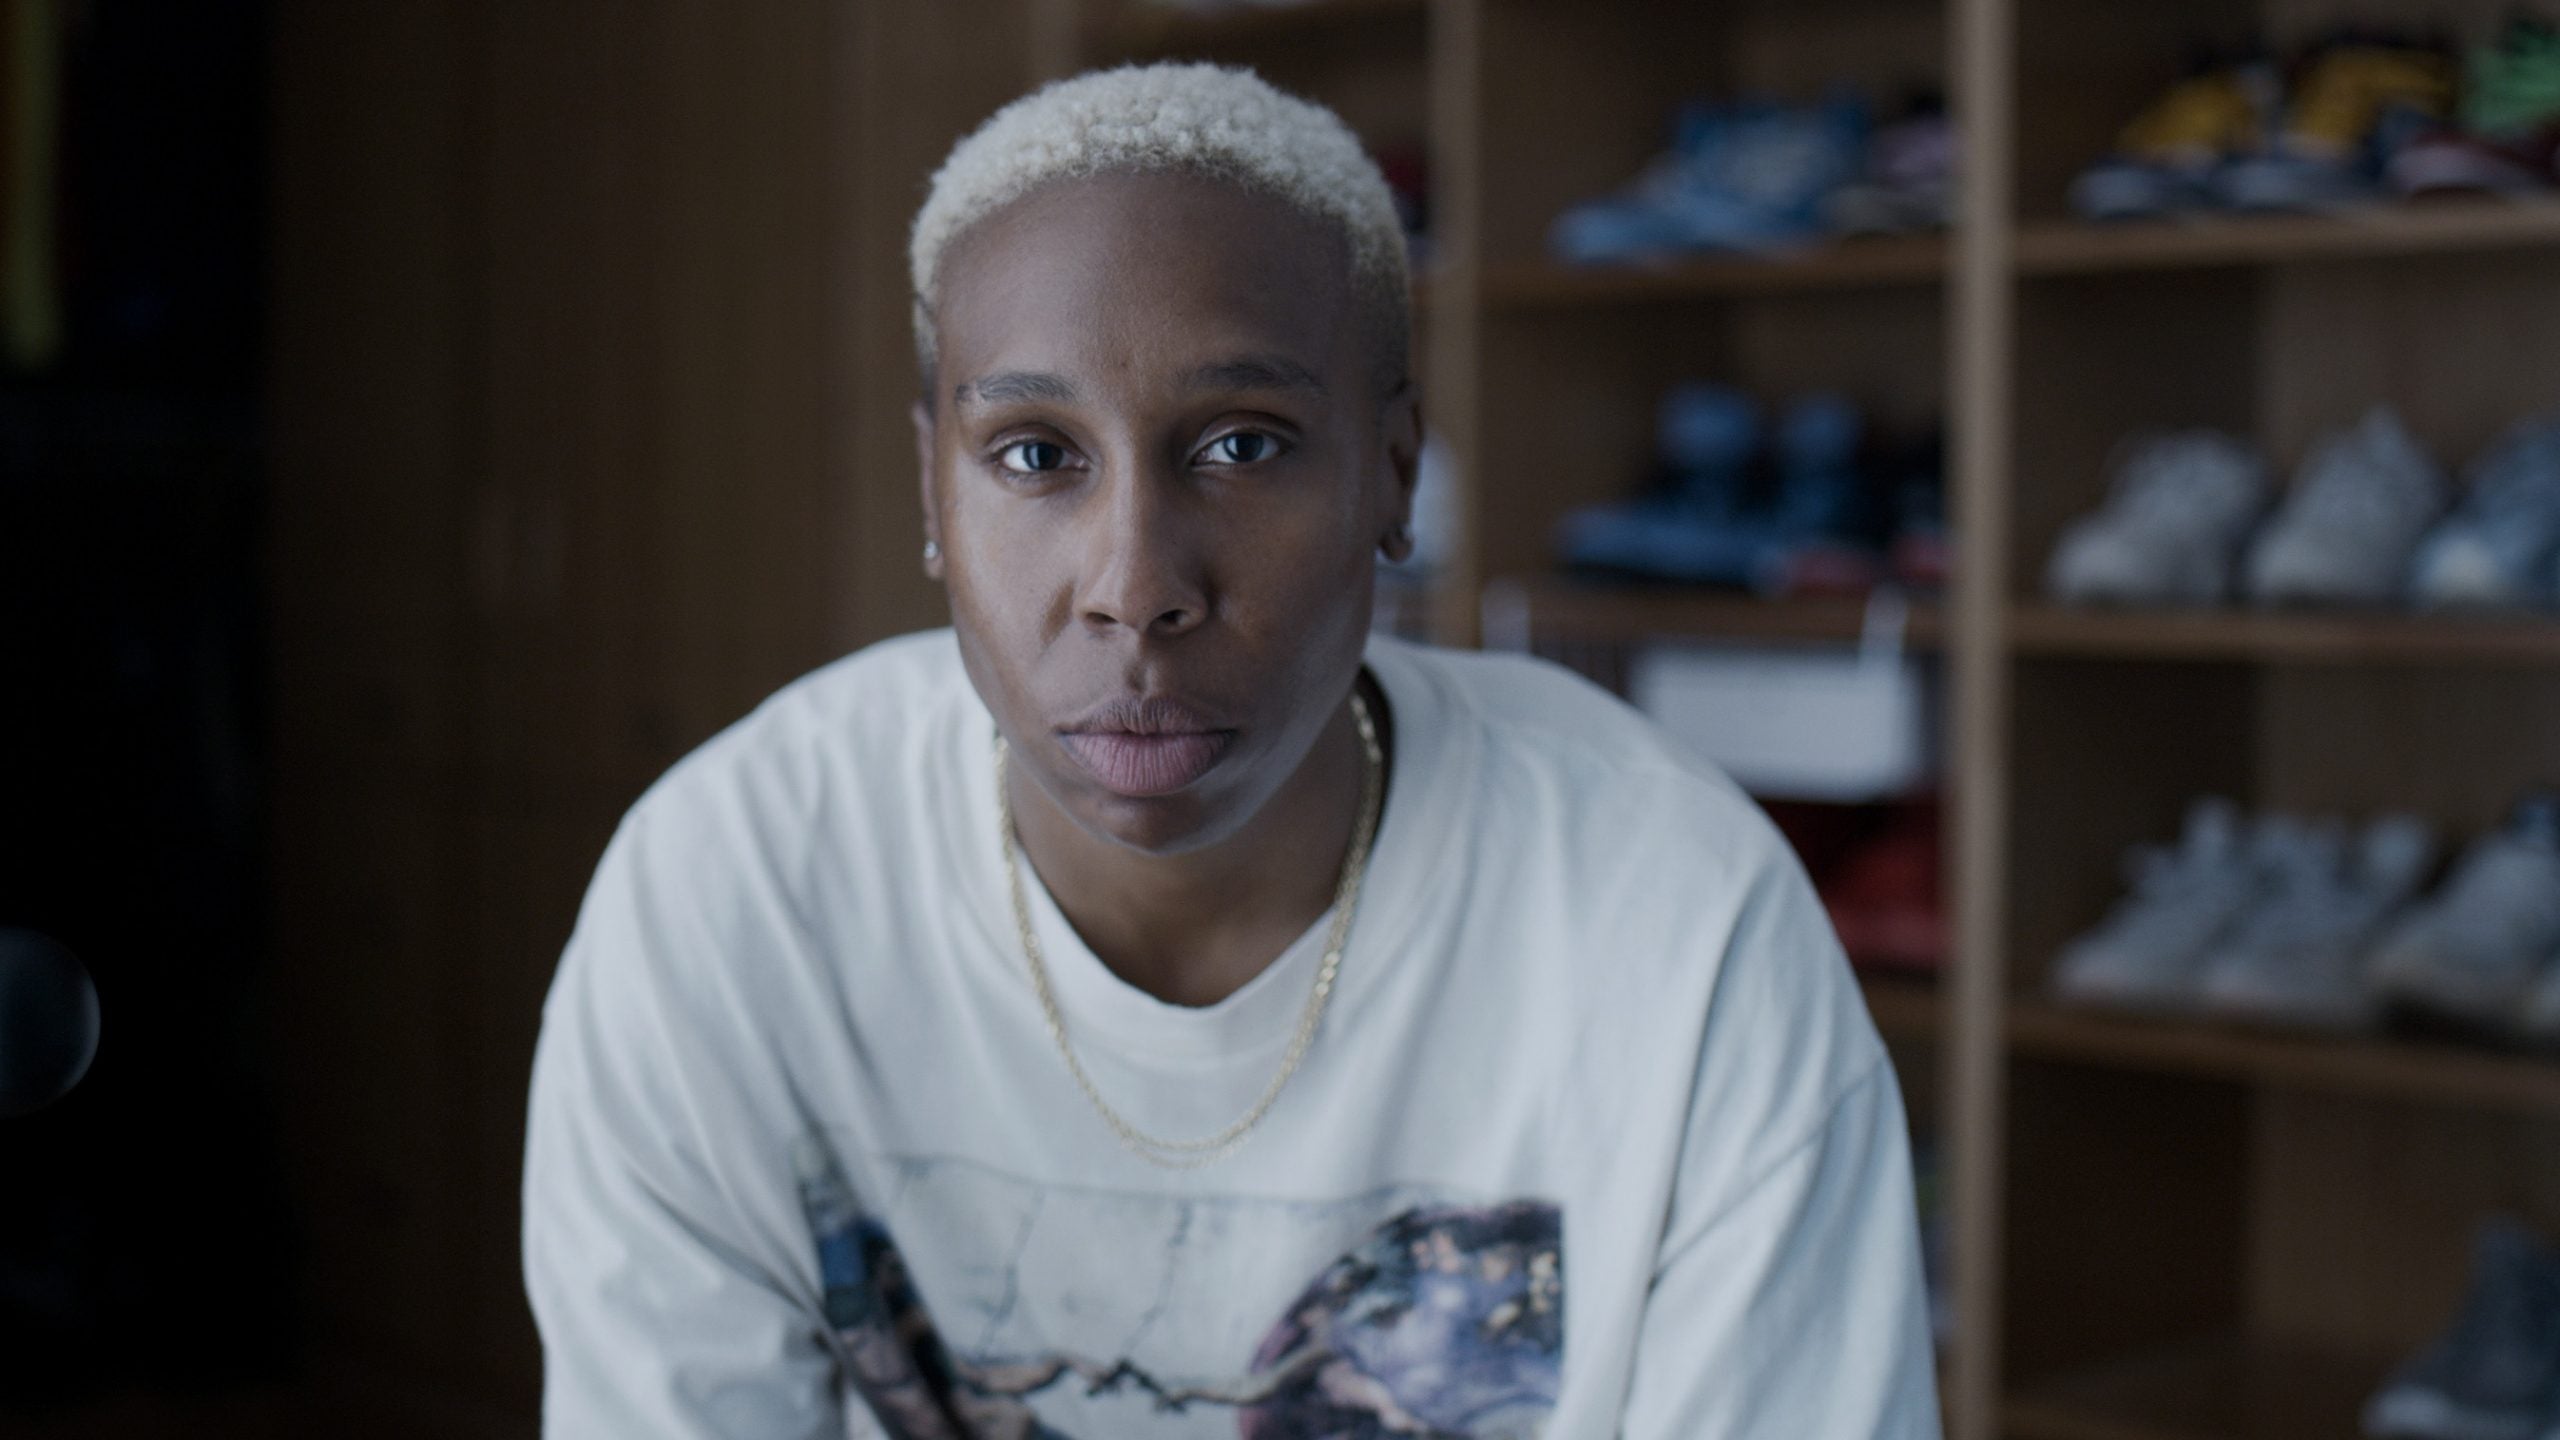 Sneakerhead Lena Waithe Sits Down To Talk About Kicks In New Series